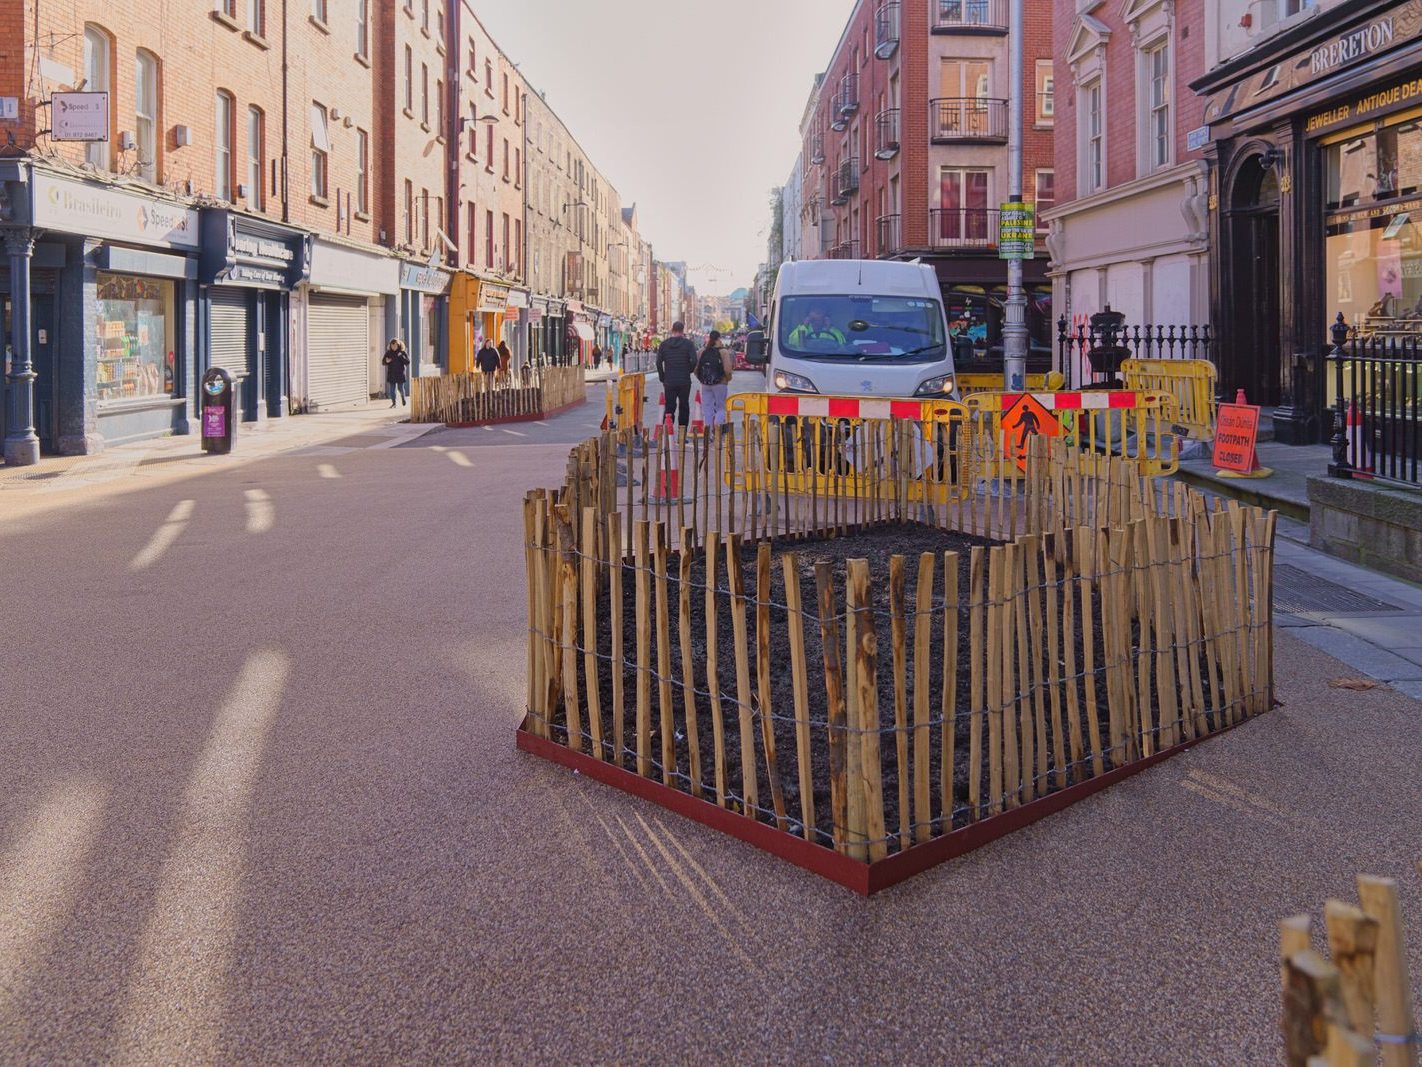 CAPEL STREET IS STILL A W.I.P. [THE PERIOD BETWEEN HALLOWEEN AND CHRISTMAS]-224785-1